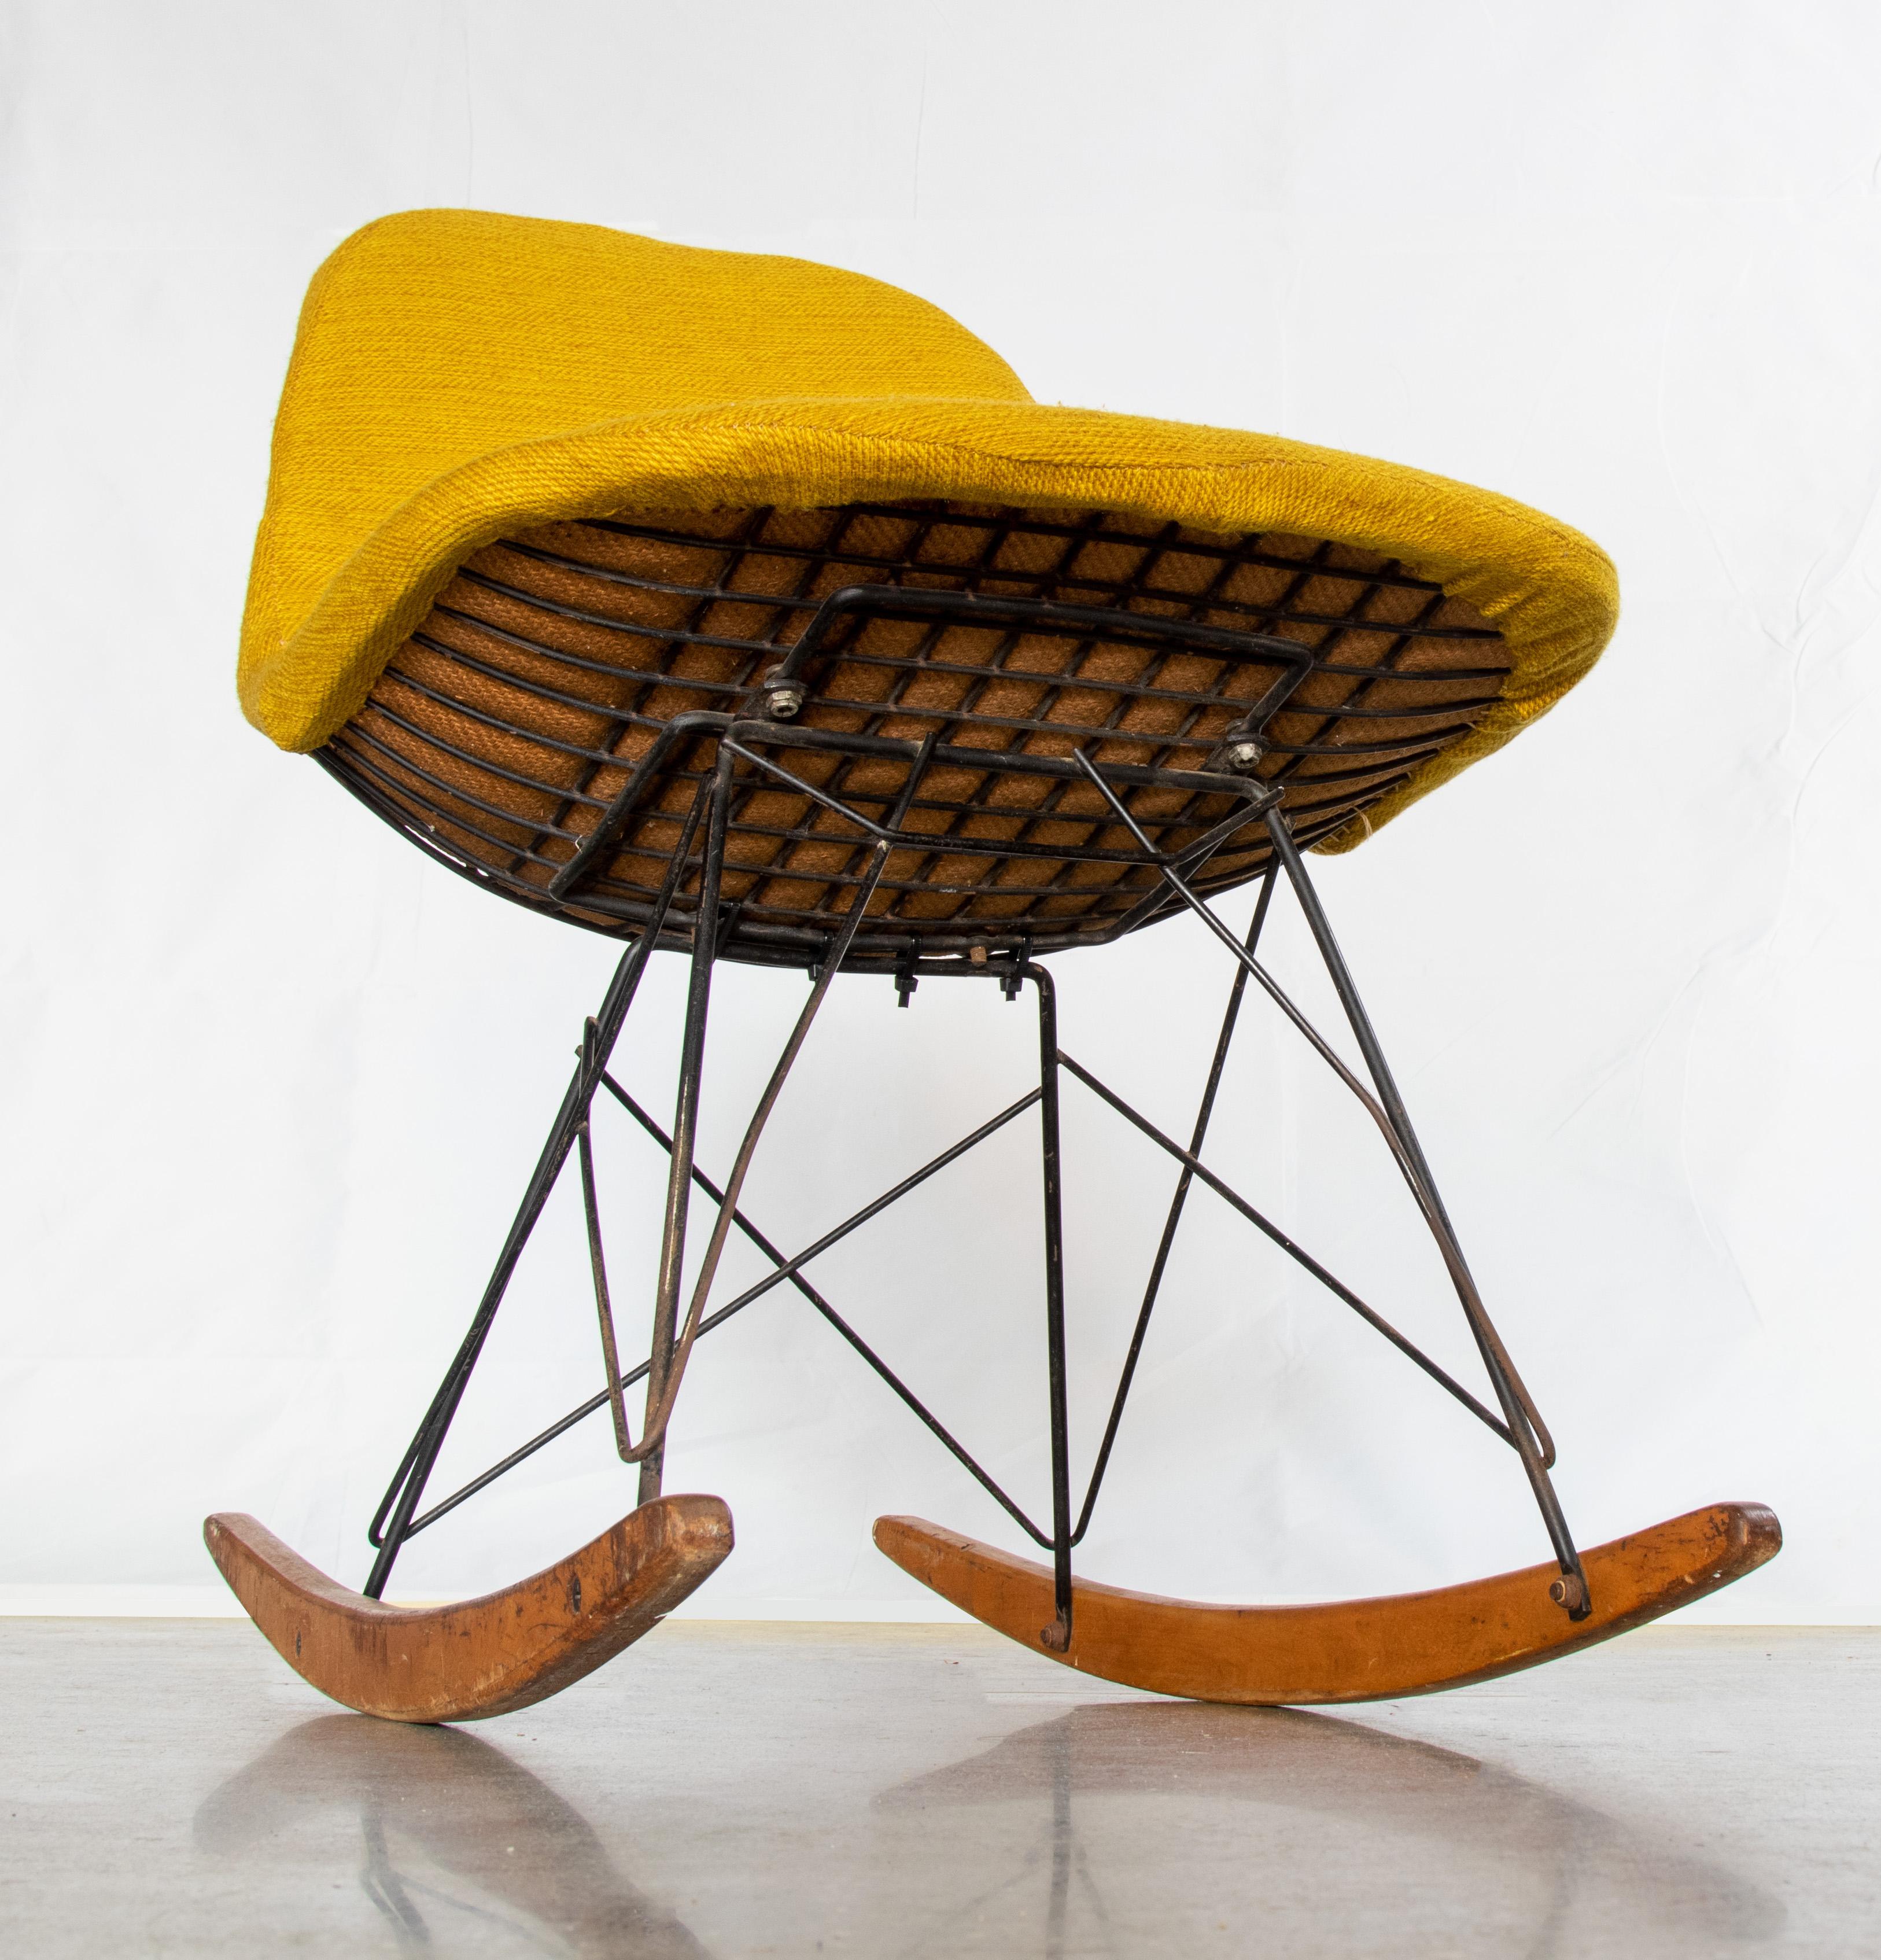 American 1950s Eames RKR Rocking Wire Side Chair with Yellow Hopsak original cover. For Sale